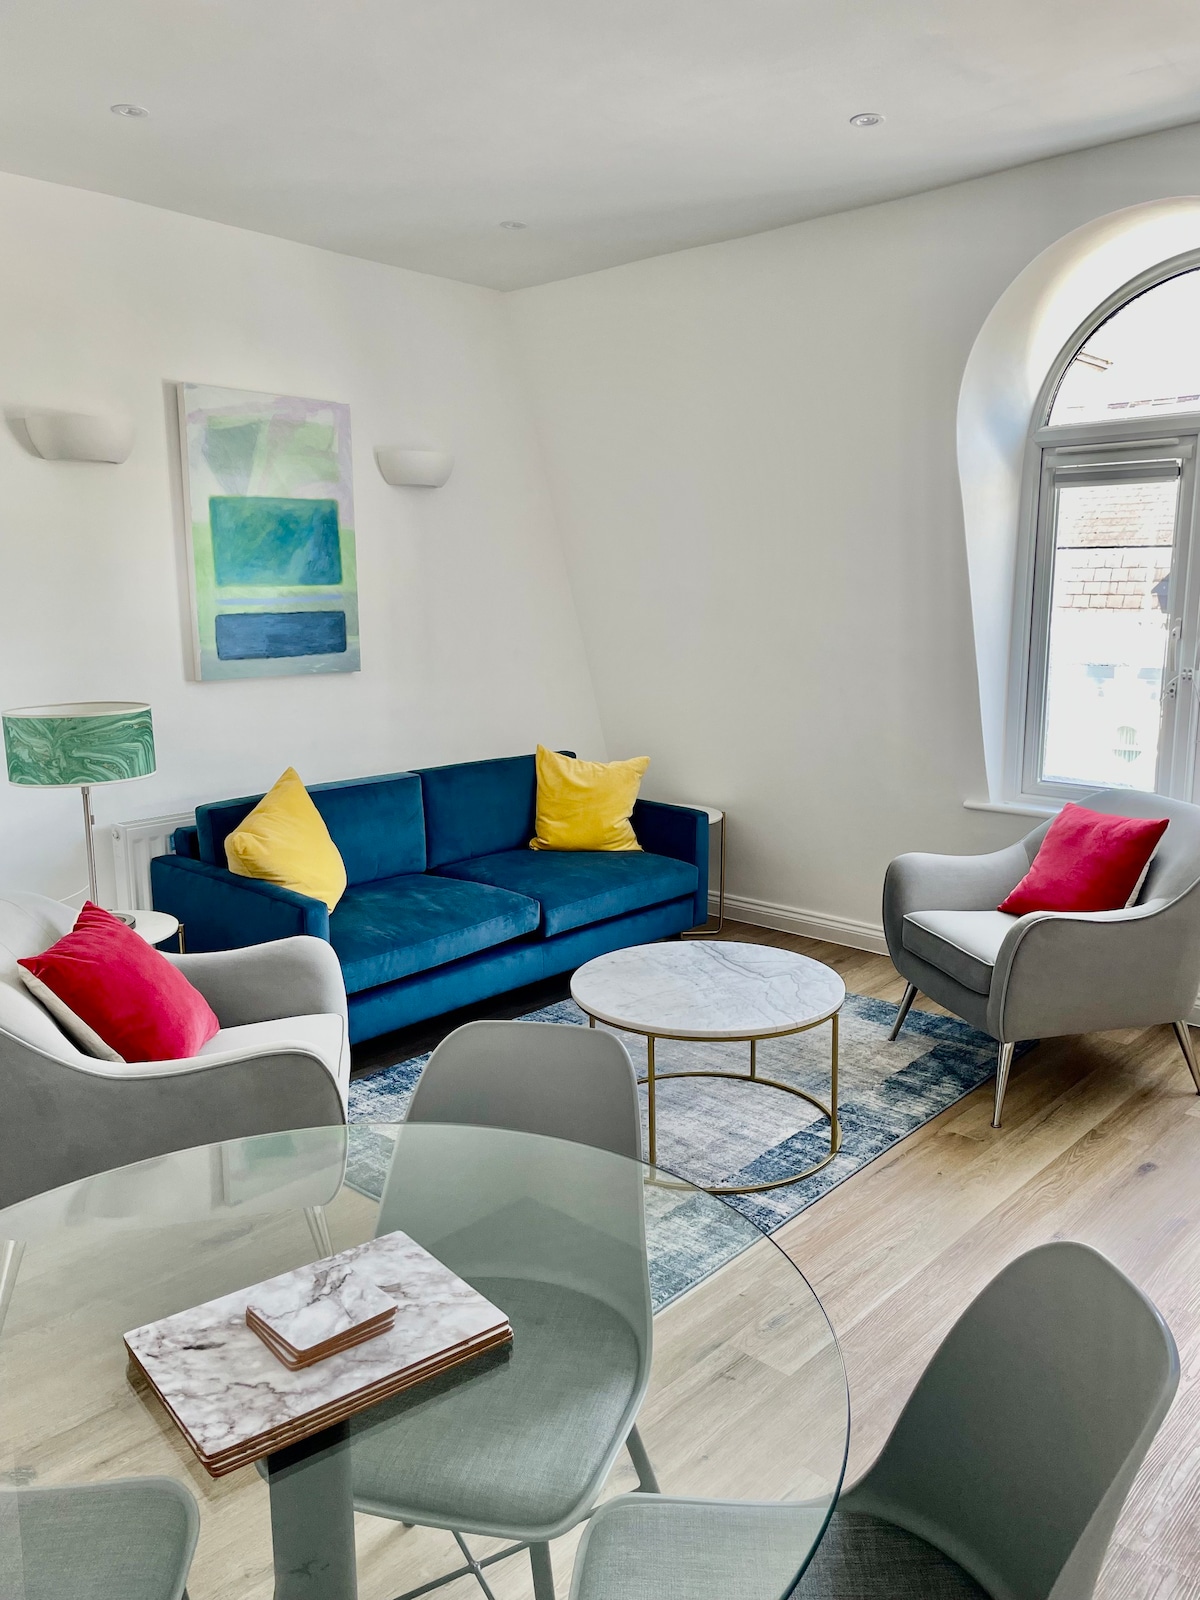 Super refurbished flat - Plymouth Hoe